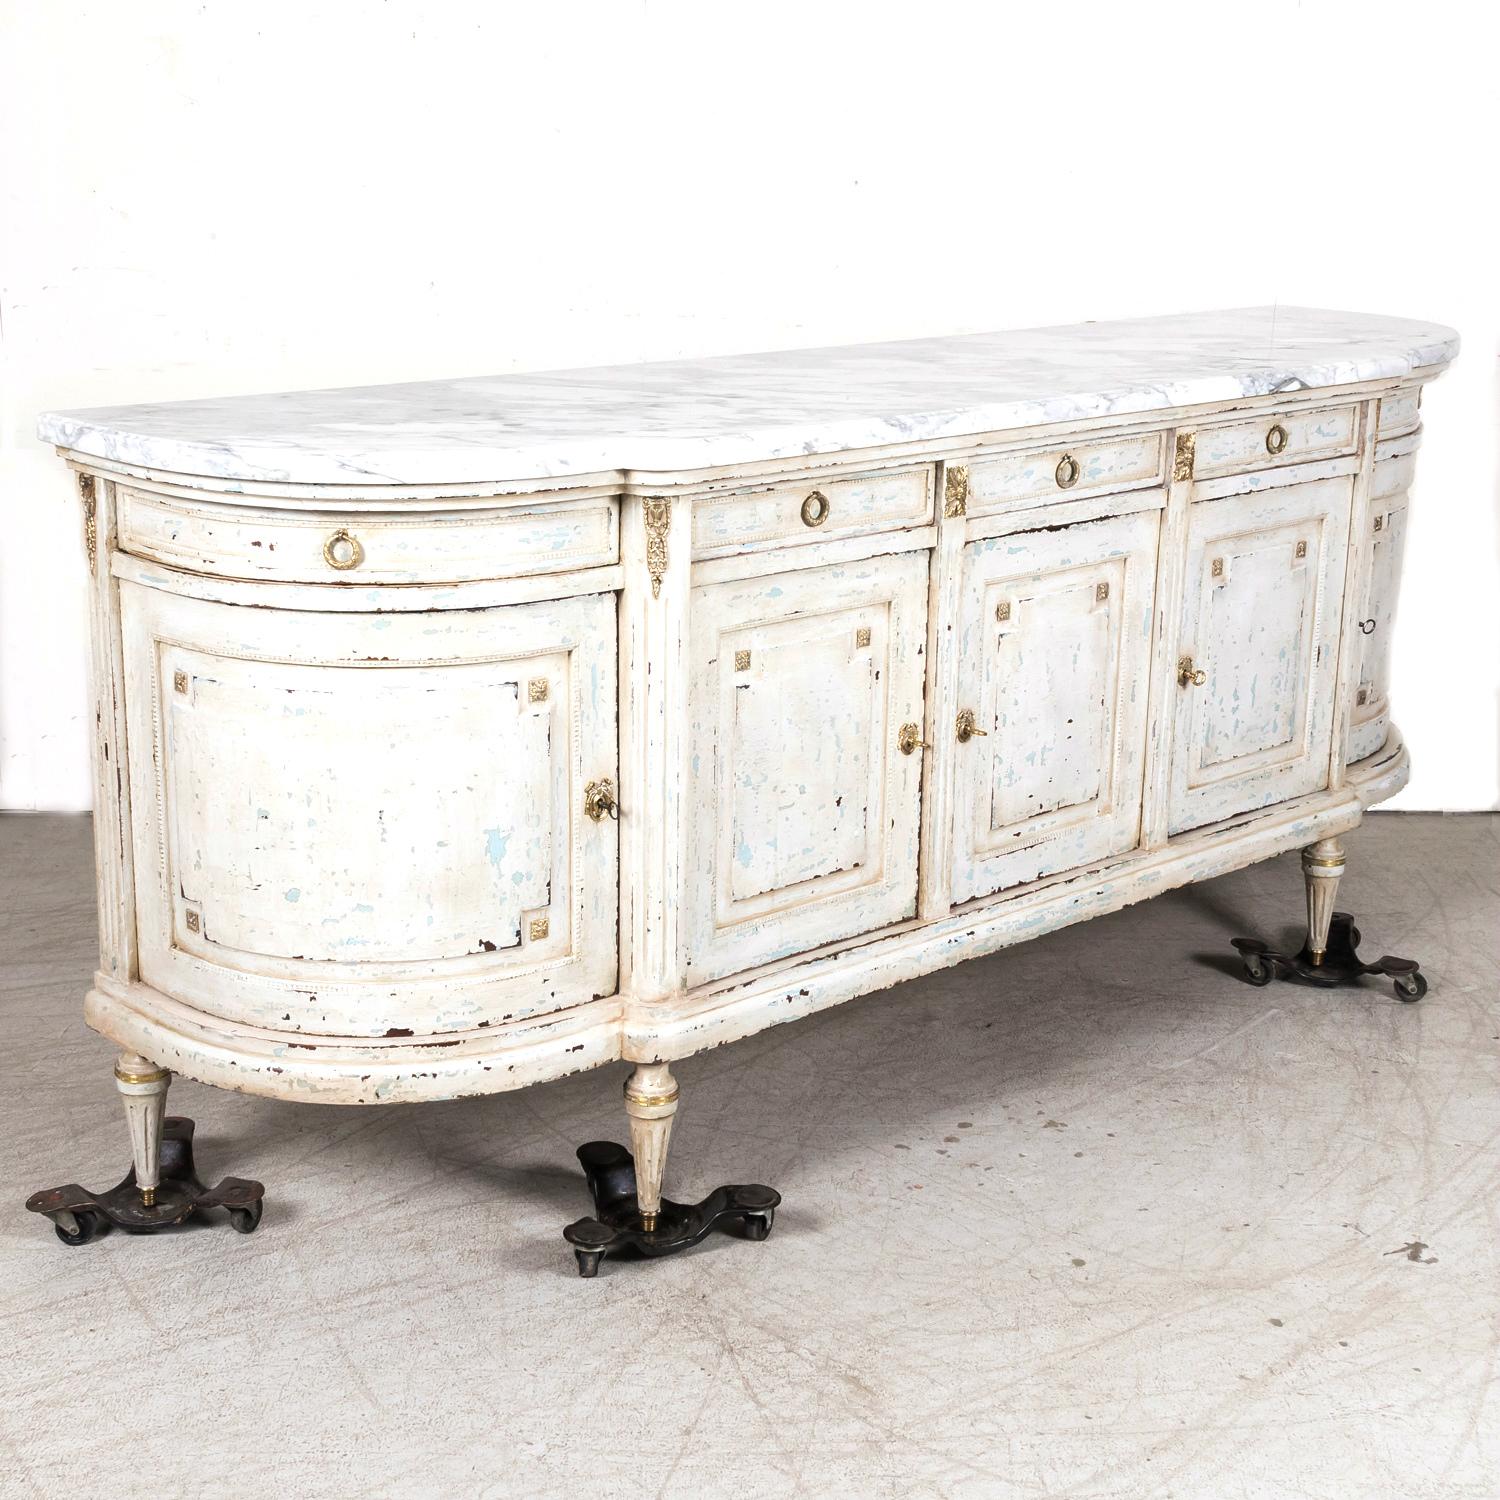 An impressive early 20th century antique French Louis XVI style five drawer, five door demilune enfilade buffet handcrafted of mahogany in Paris, circa 1920s. Having a beautiful painted finish, the original thick, moulded and beveled Cararra marble